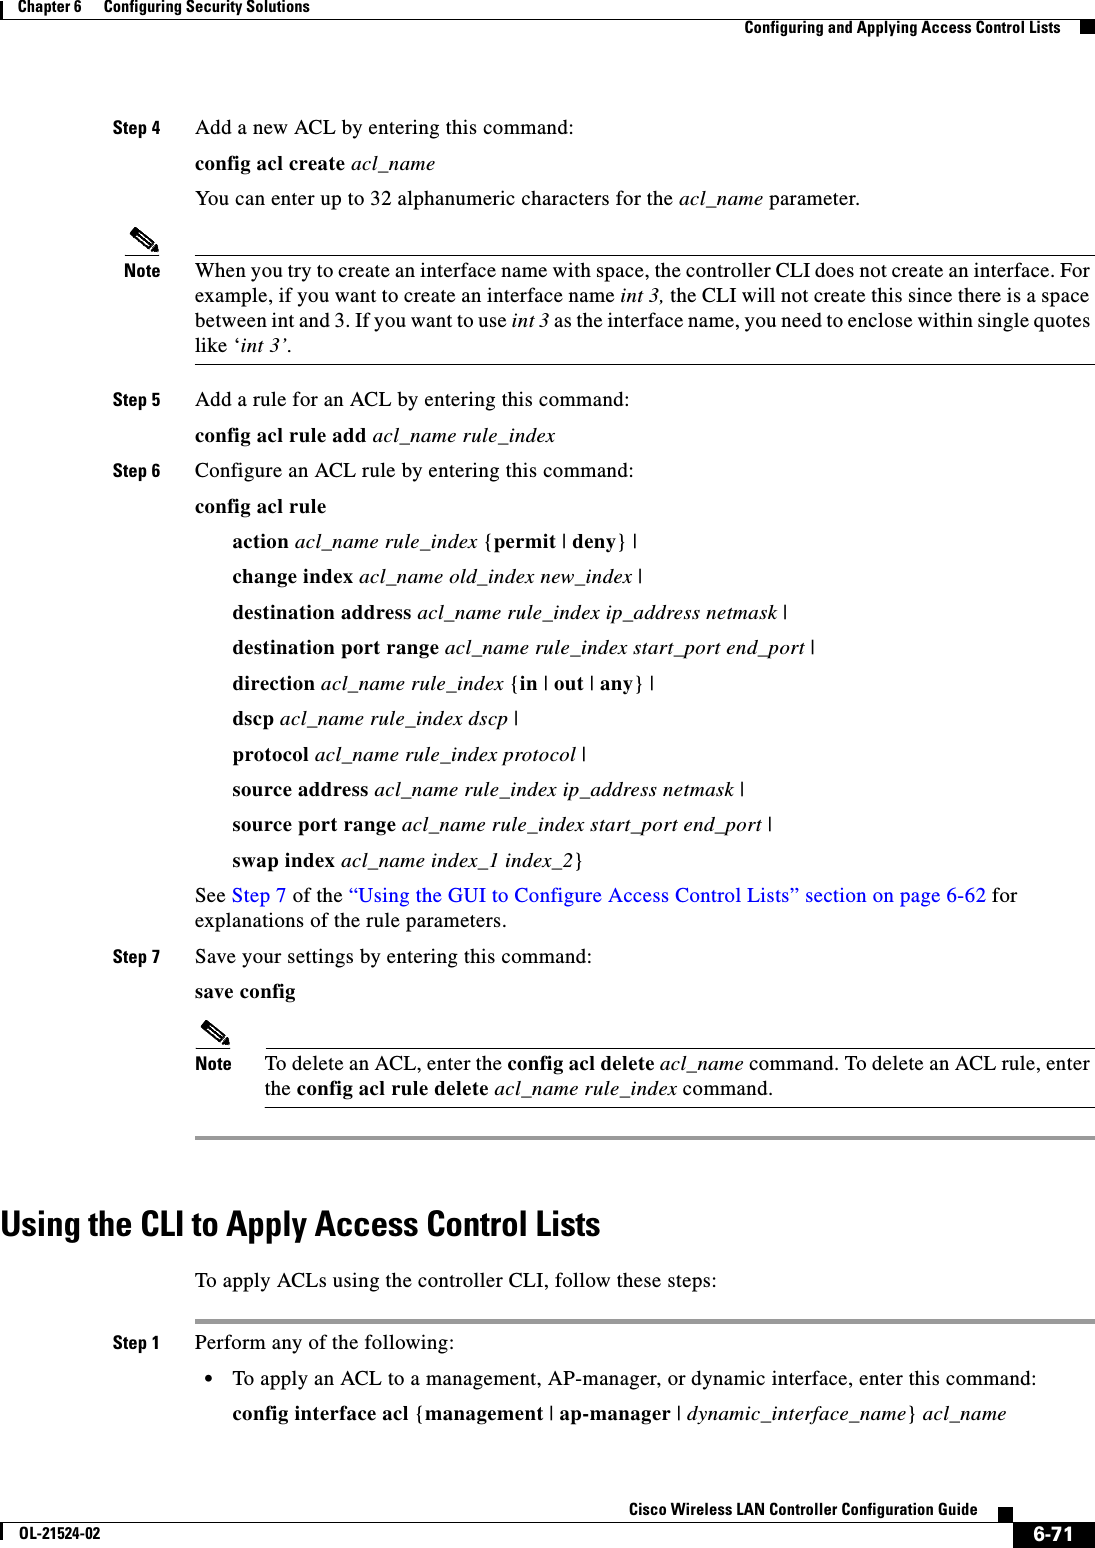  6-71Cisco Wireless LAN Controller Configuration GuideOL-21524-02Chapter 6      Configuring Security Solutions  Configuring and Applying Access Control ListsStep 4 Add a new ACL by entering this command:config acl create acl_nameYou can enter up to 32 alphanumeric characters for the acl_name parameter.Note When you try to create an interface name with space, the controller CLI does not create an interface. For example, if you want to create an interface name int 3, the CLI will not create this since there is a space between int and 3. If you want to use int 3 as the interface name, you need to enclose within single quotes like ‘int 3’.Step 5 Add a rule for an ACL by entering this command:config acl rule add acl_name rule_indexStep 6 Configure an ACL rule by entering this command:config acl rule action acl_name rule_index {permit | deny} |change index acl_name old_index new_index |destination address acl_name rule_index ip_address netmask |destination port range acl_name rule_index start_port end_port |direction acl_name rule_index {in | out | any} |dscp acl_name rule_index dscp |protocol acl_name rule_index protocol |source address acl_name rule_index ip_address netmask |source port range acl_name rule_index start_port end_port |swap index acl_name index_1 index_2}See Step 7 of the “Using the GUI to Configure Access Control Lists” section on page 6-62 for explanations of the rule parameters.Step 7 Save your settings by entering this command:save configNote To delete an ACL, enter the config acl delete acl_name command. To delete an ACL rule, enter the config acl rule delete acl_name rule_index command.Using the CLI to Apply Access Control ListsTo apply ACLs using the controller CLI, follow these steps:Step 1 Perform any of the following:  • To apply an ACL to a management, AP-manager, or dynamic interface, enter this command:config interface acl {management | ap-manager | dynamic_interface_name} acl_name